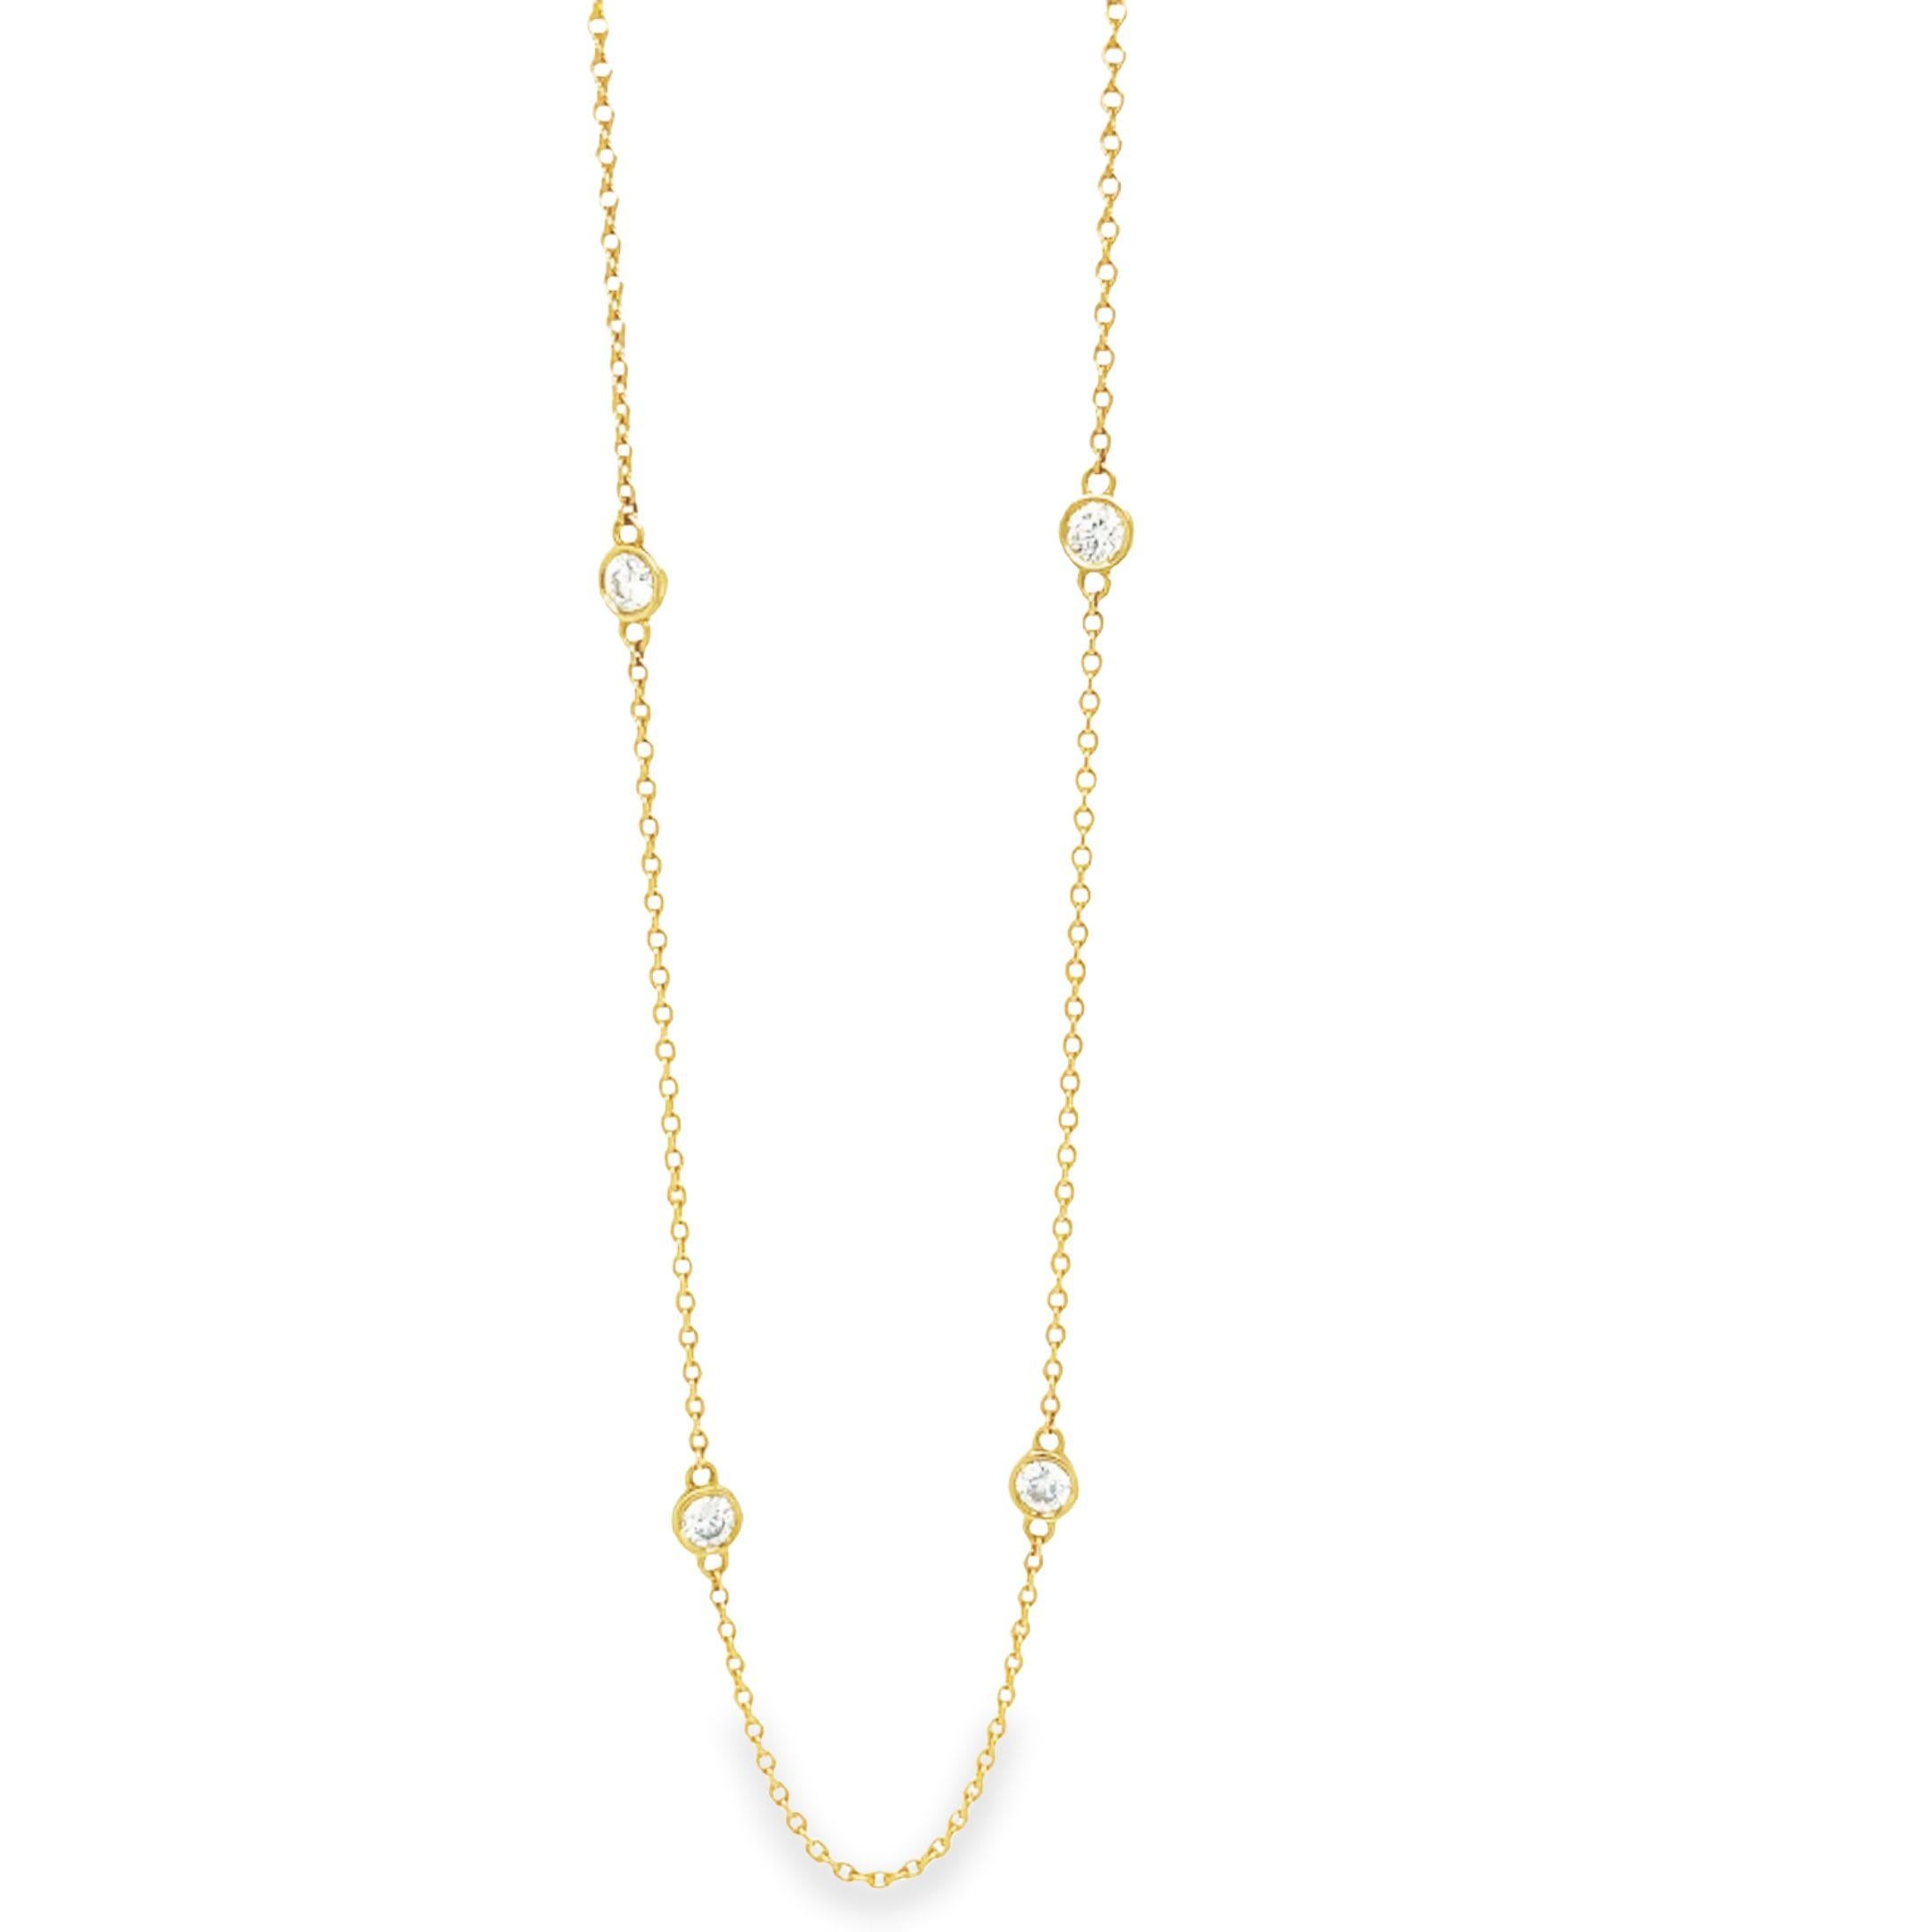 Round Cut Gems Are Forever Diamonds by the Yard 8 Round Bezel Necklace in 18k Yellow Gold For Sale